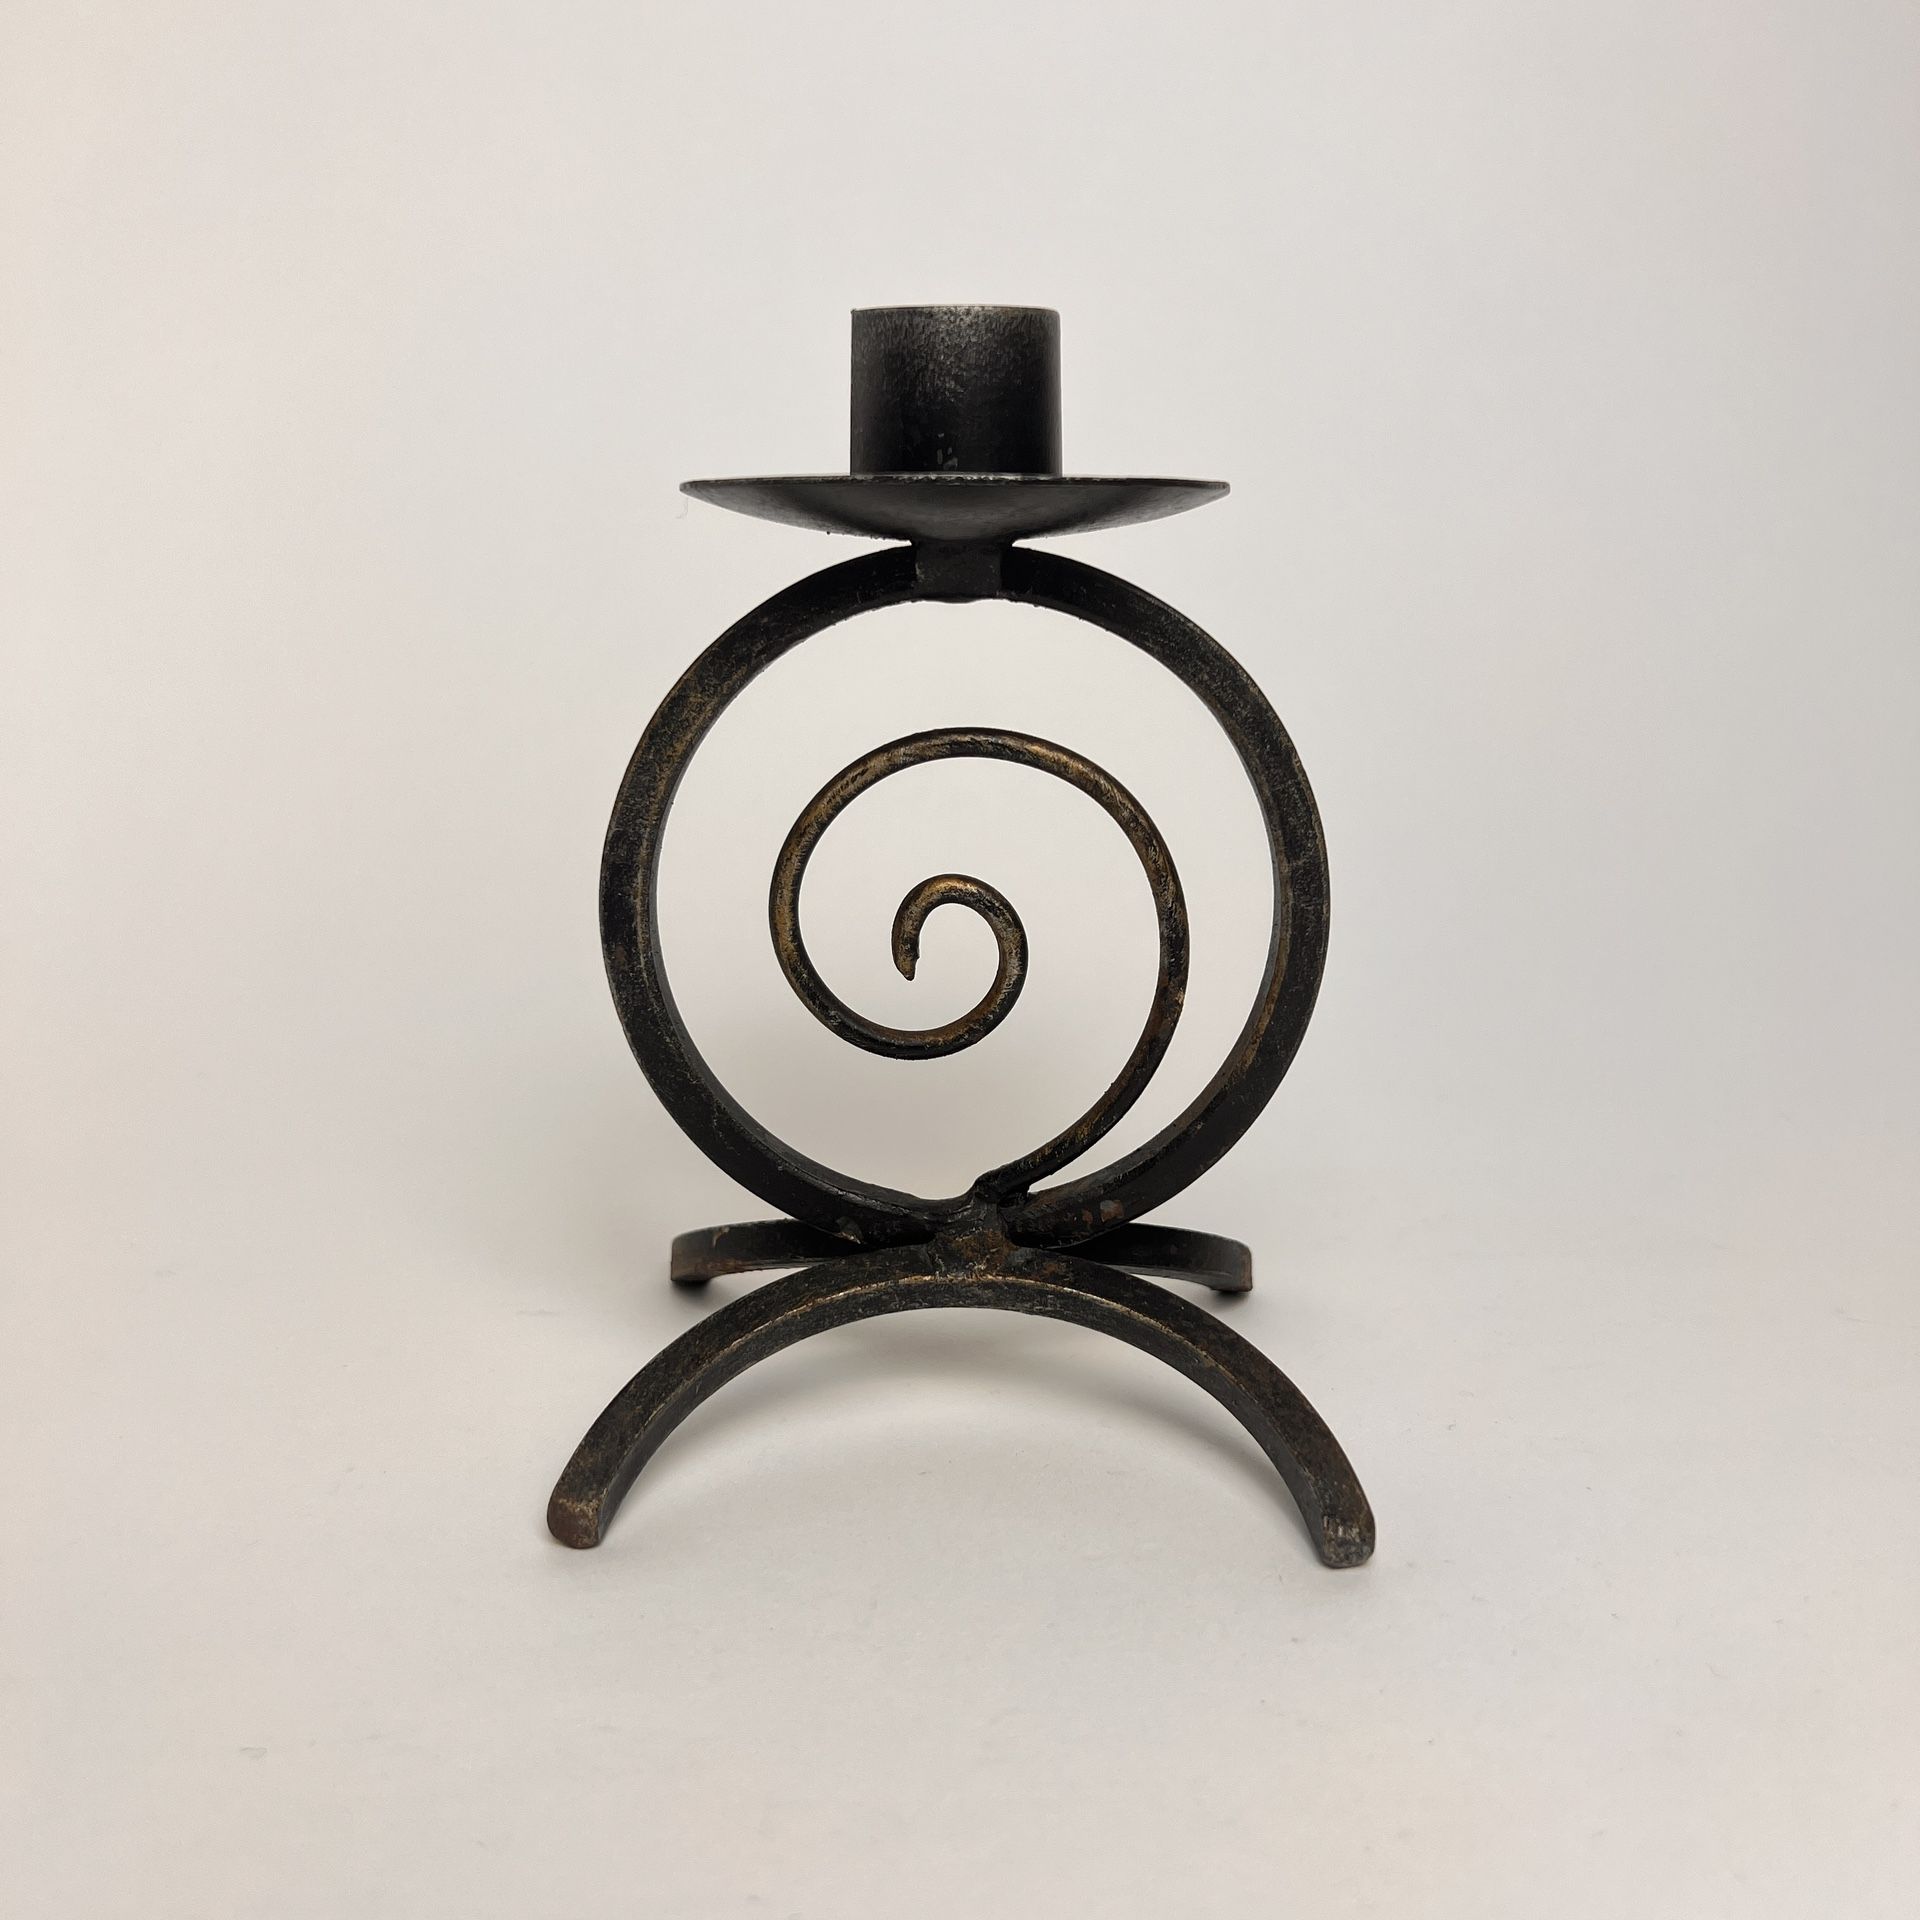 Vintage Wrought Iron Candle Holder. Made in Røros, Norway. 